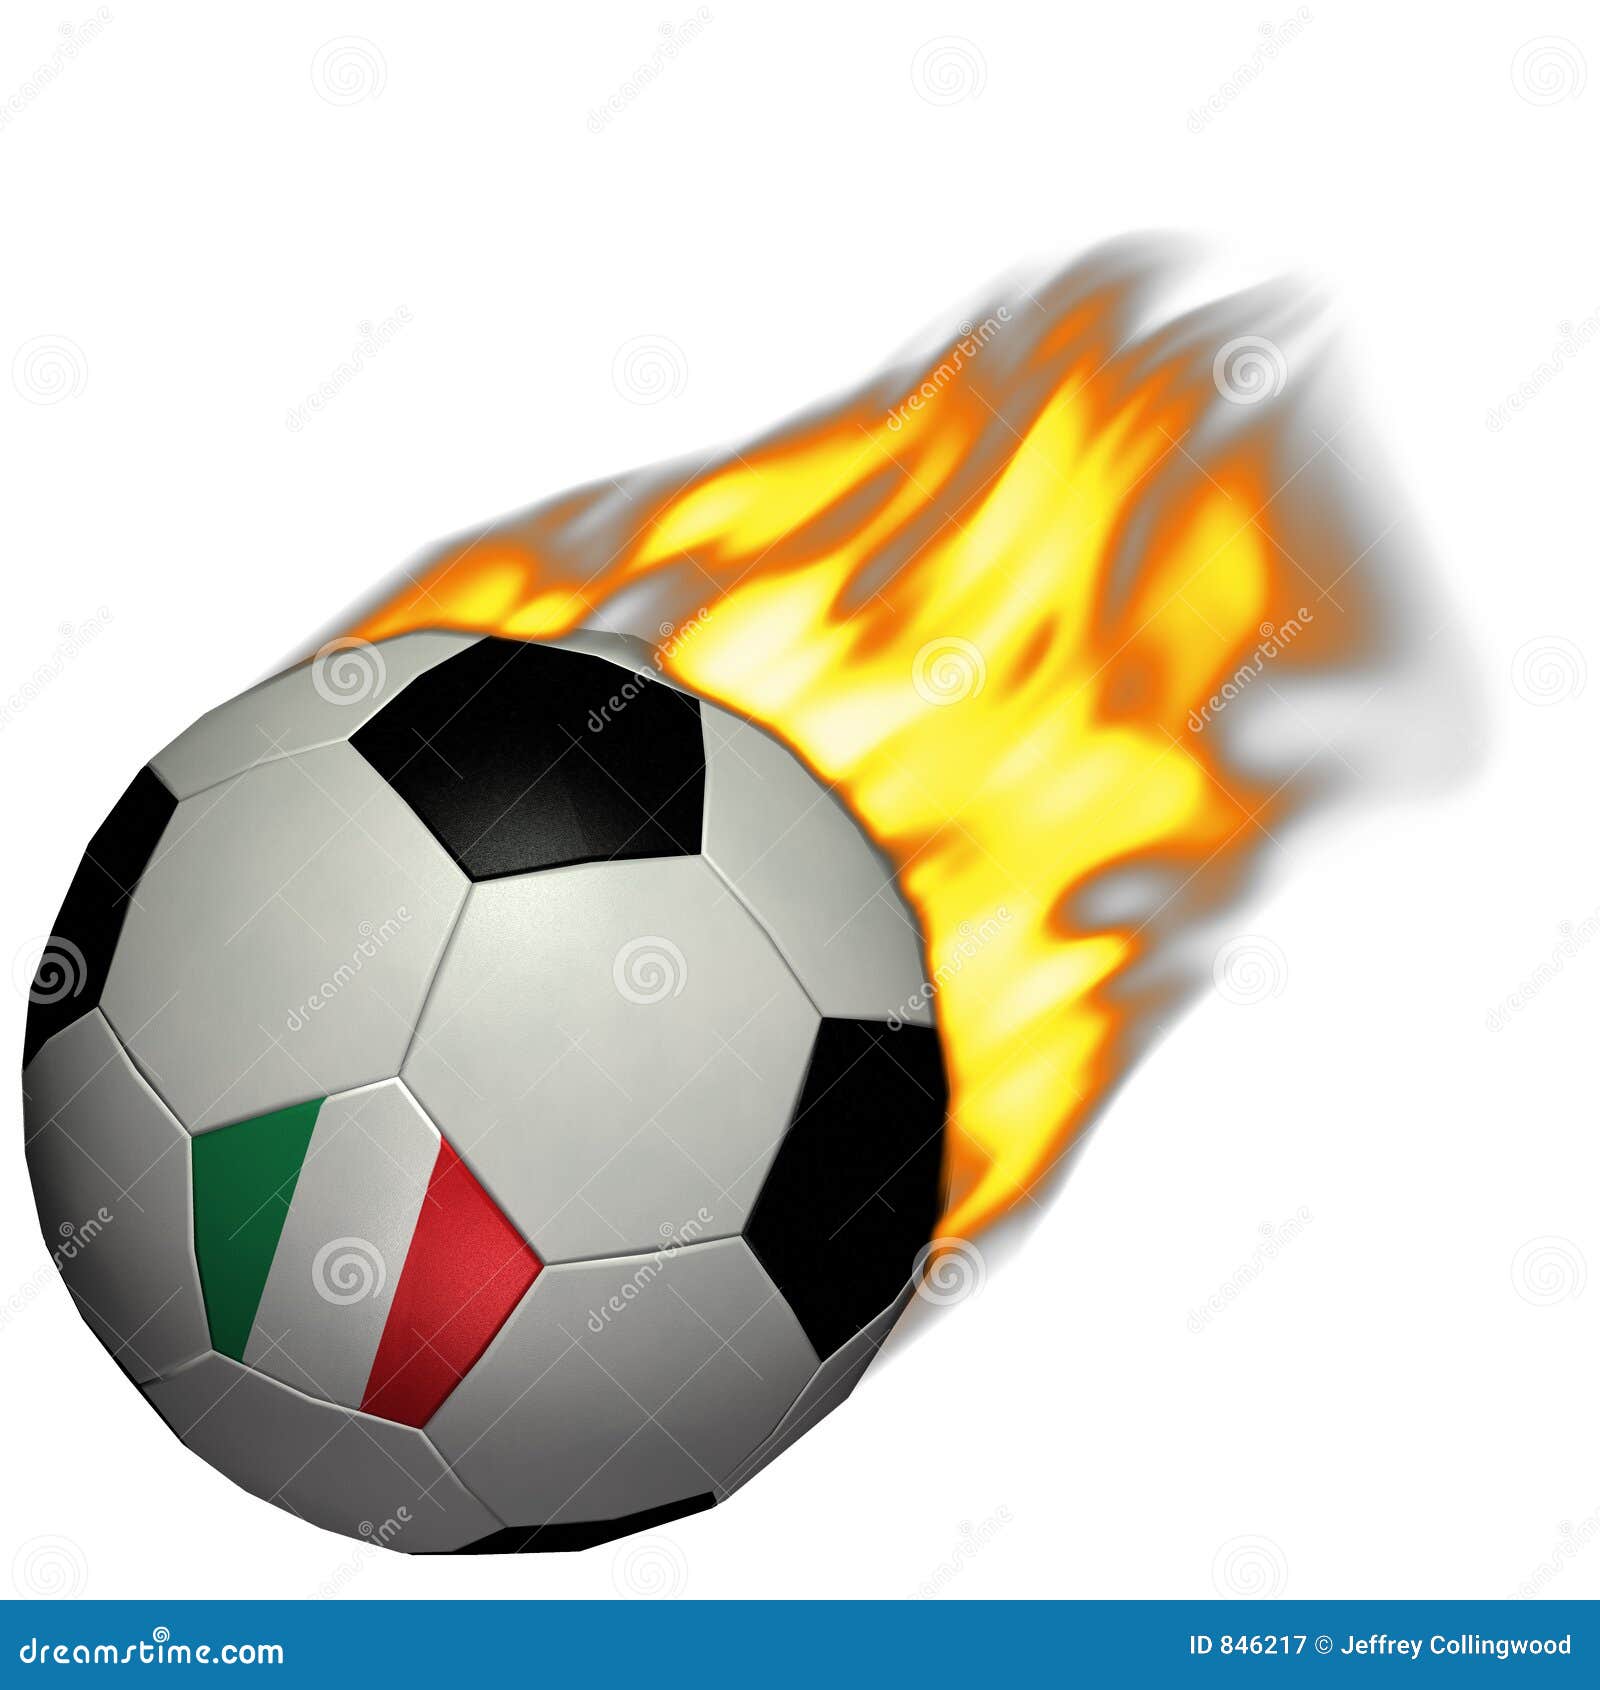 world cup football clipart - photo #43